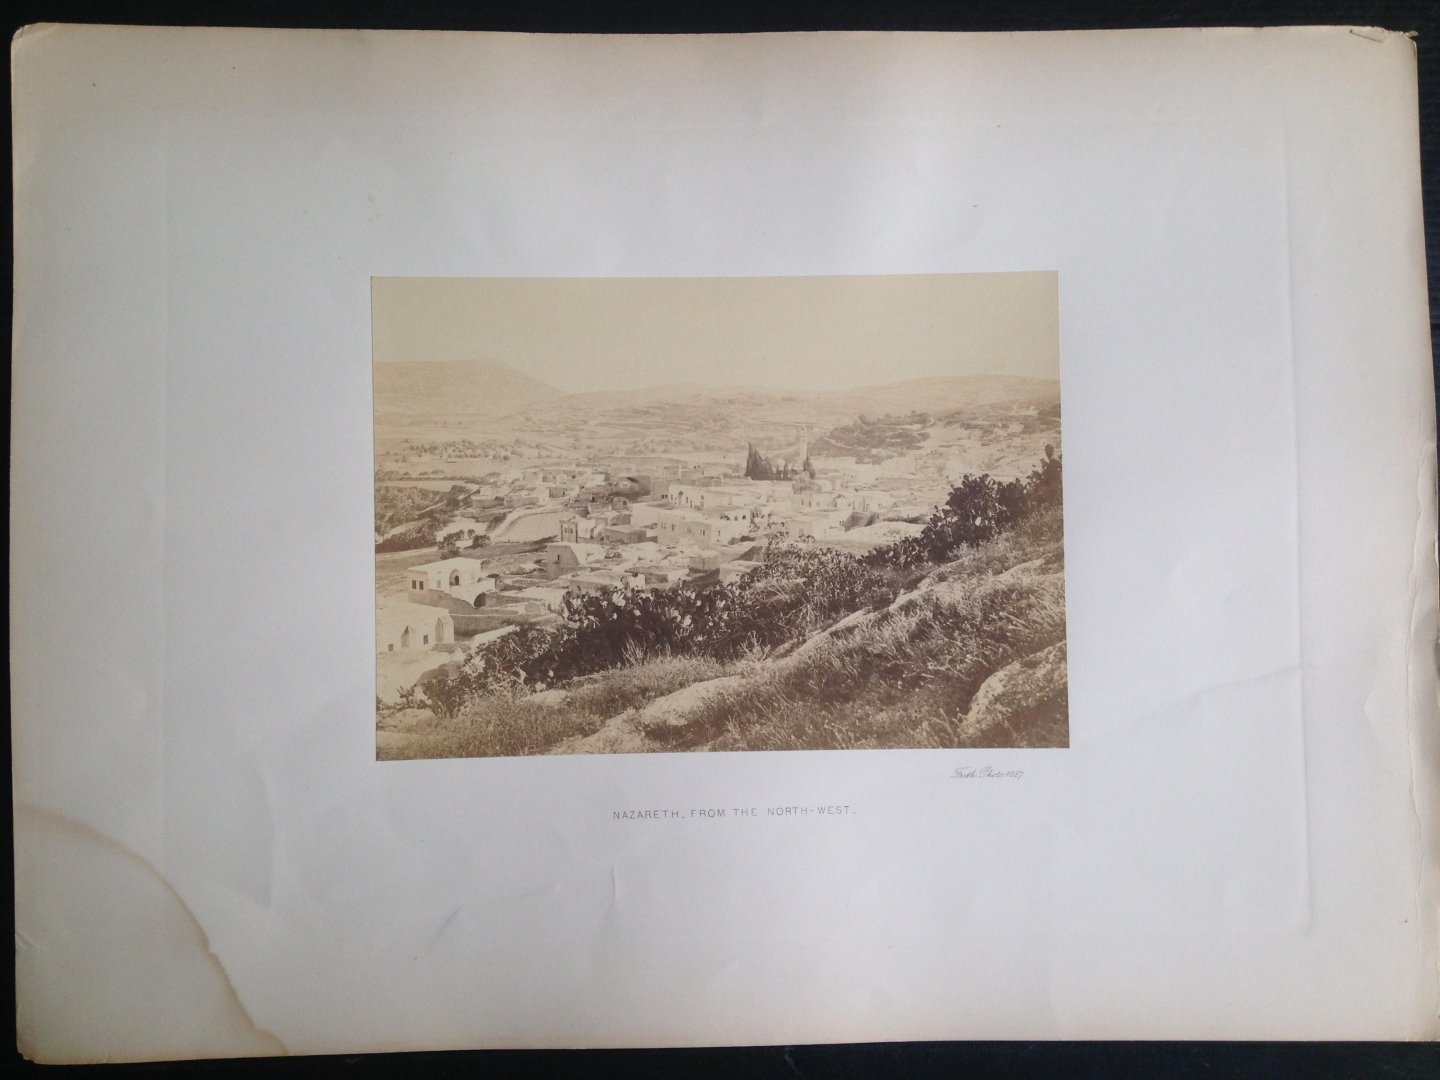 Frith, Francis - Nazareth, from the north-west, Series Egypt and Palestine